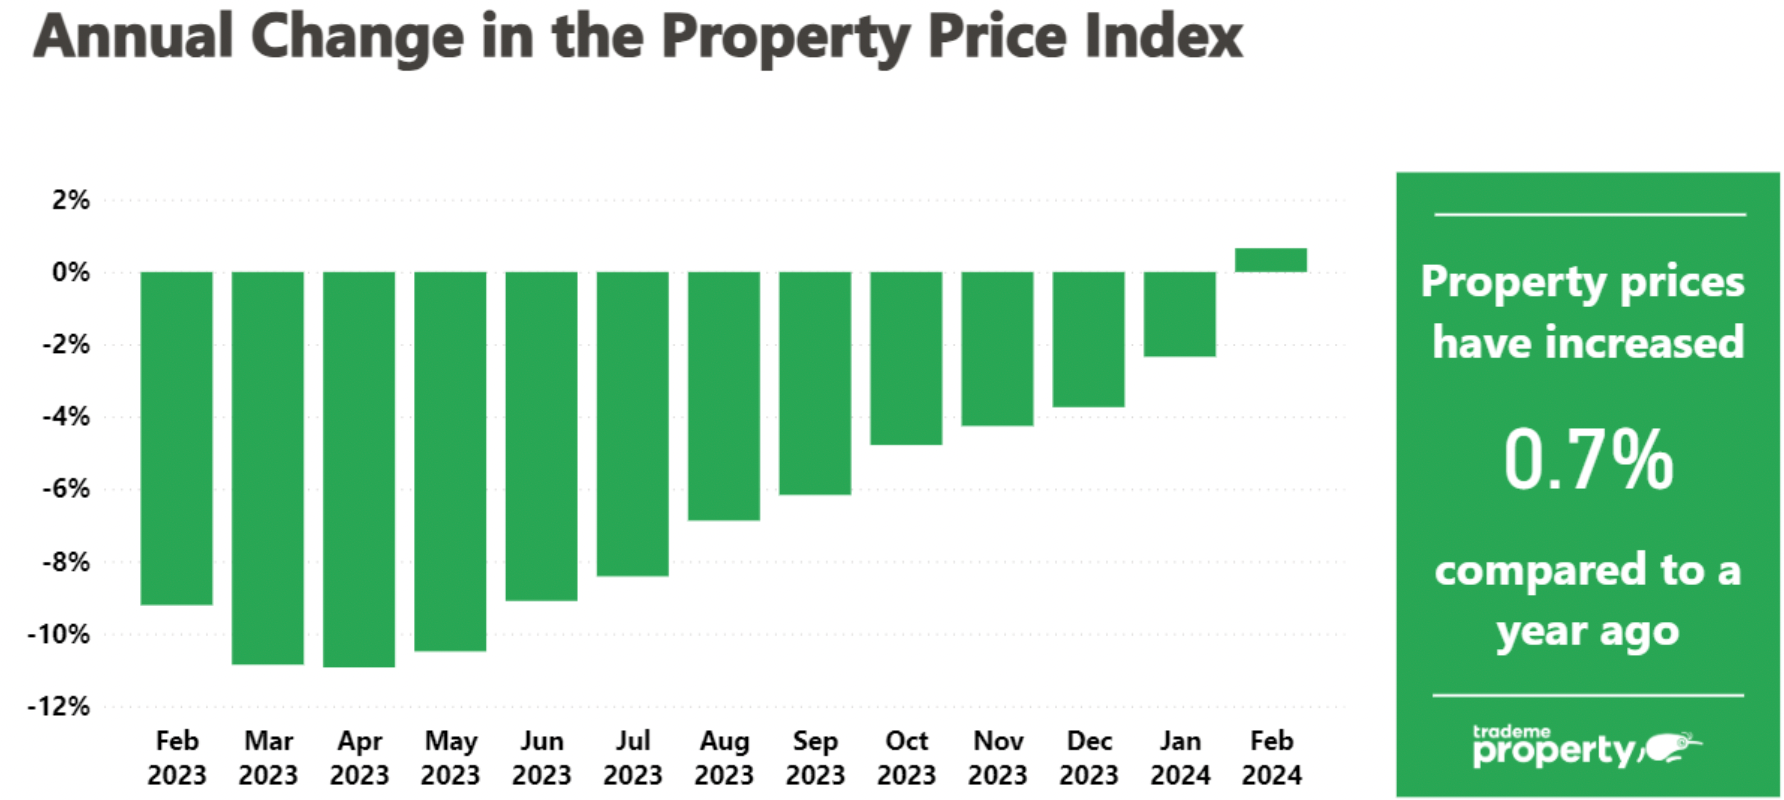 Annual Change in the Property Price Index